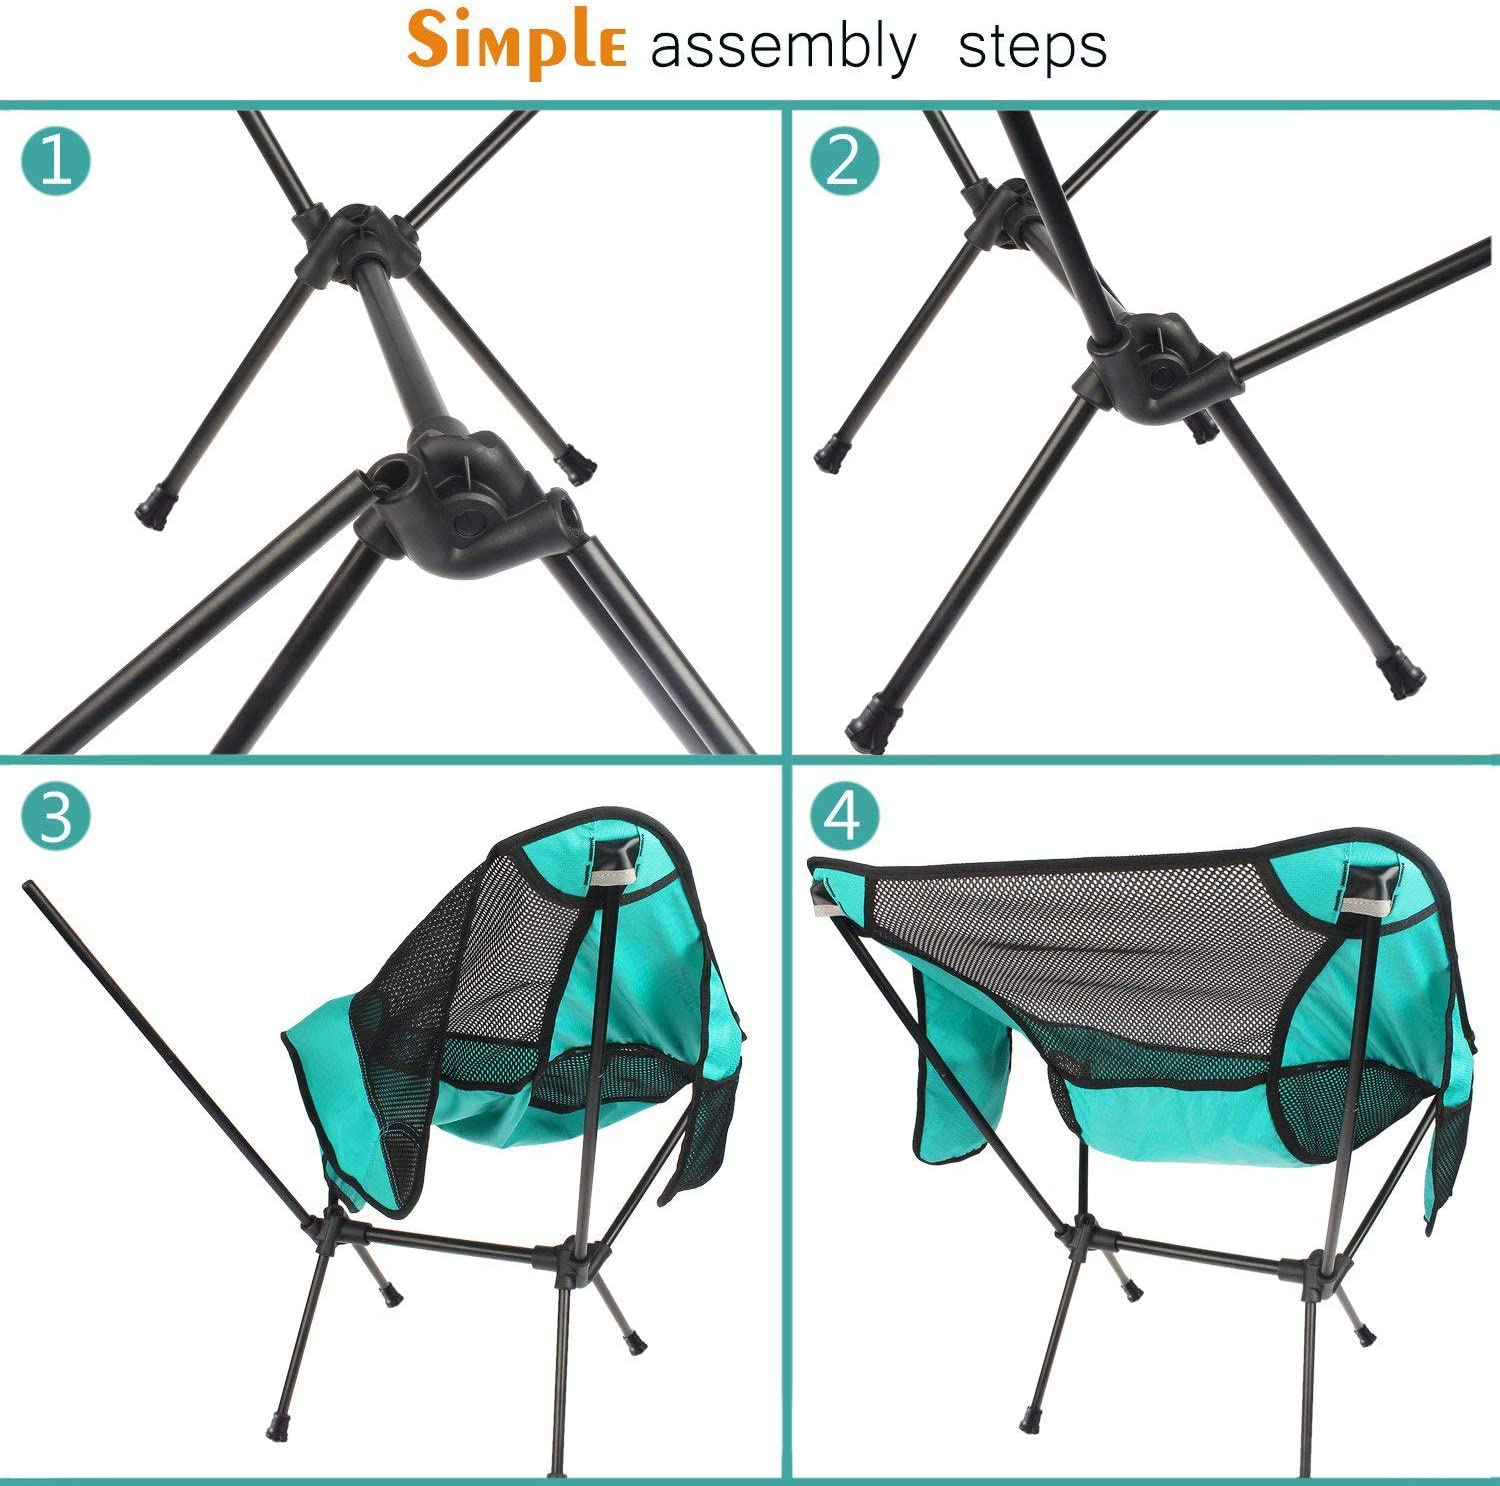 2pc Backpacking Camping Chairs, Lightweight Portable Camping Chair, Foldable Chair, Outdoor Chair, Kids Camp Chair, Camping Chairs 2 Pack for Adults, Folding Chairs, Outside Chairs - image 4 of 7